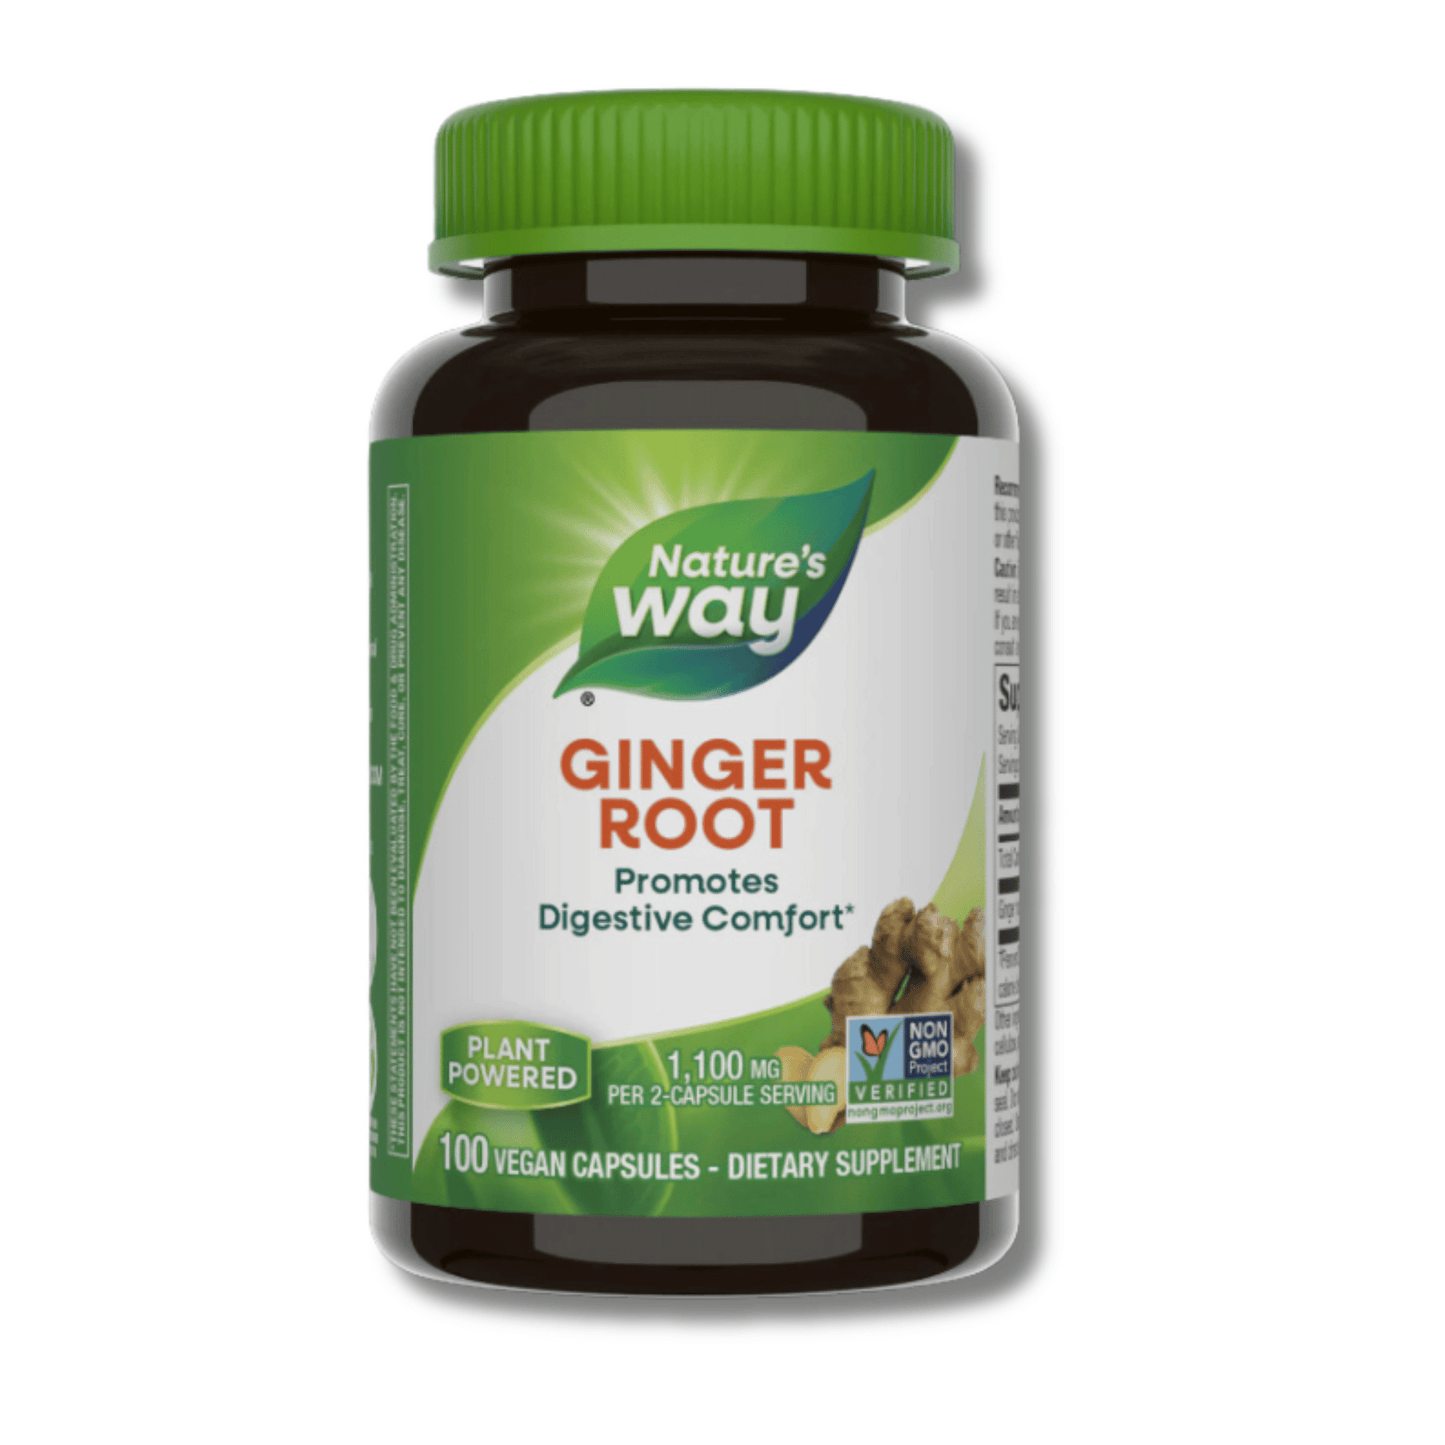 Primary Image of Ginger Root